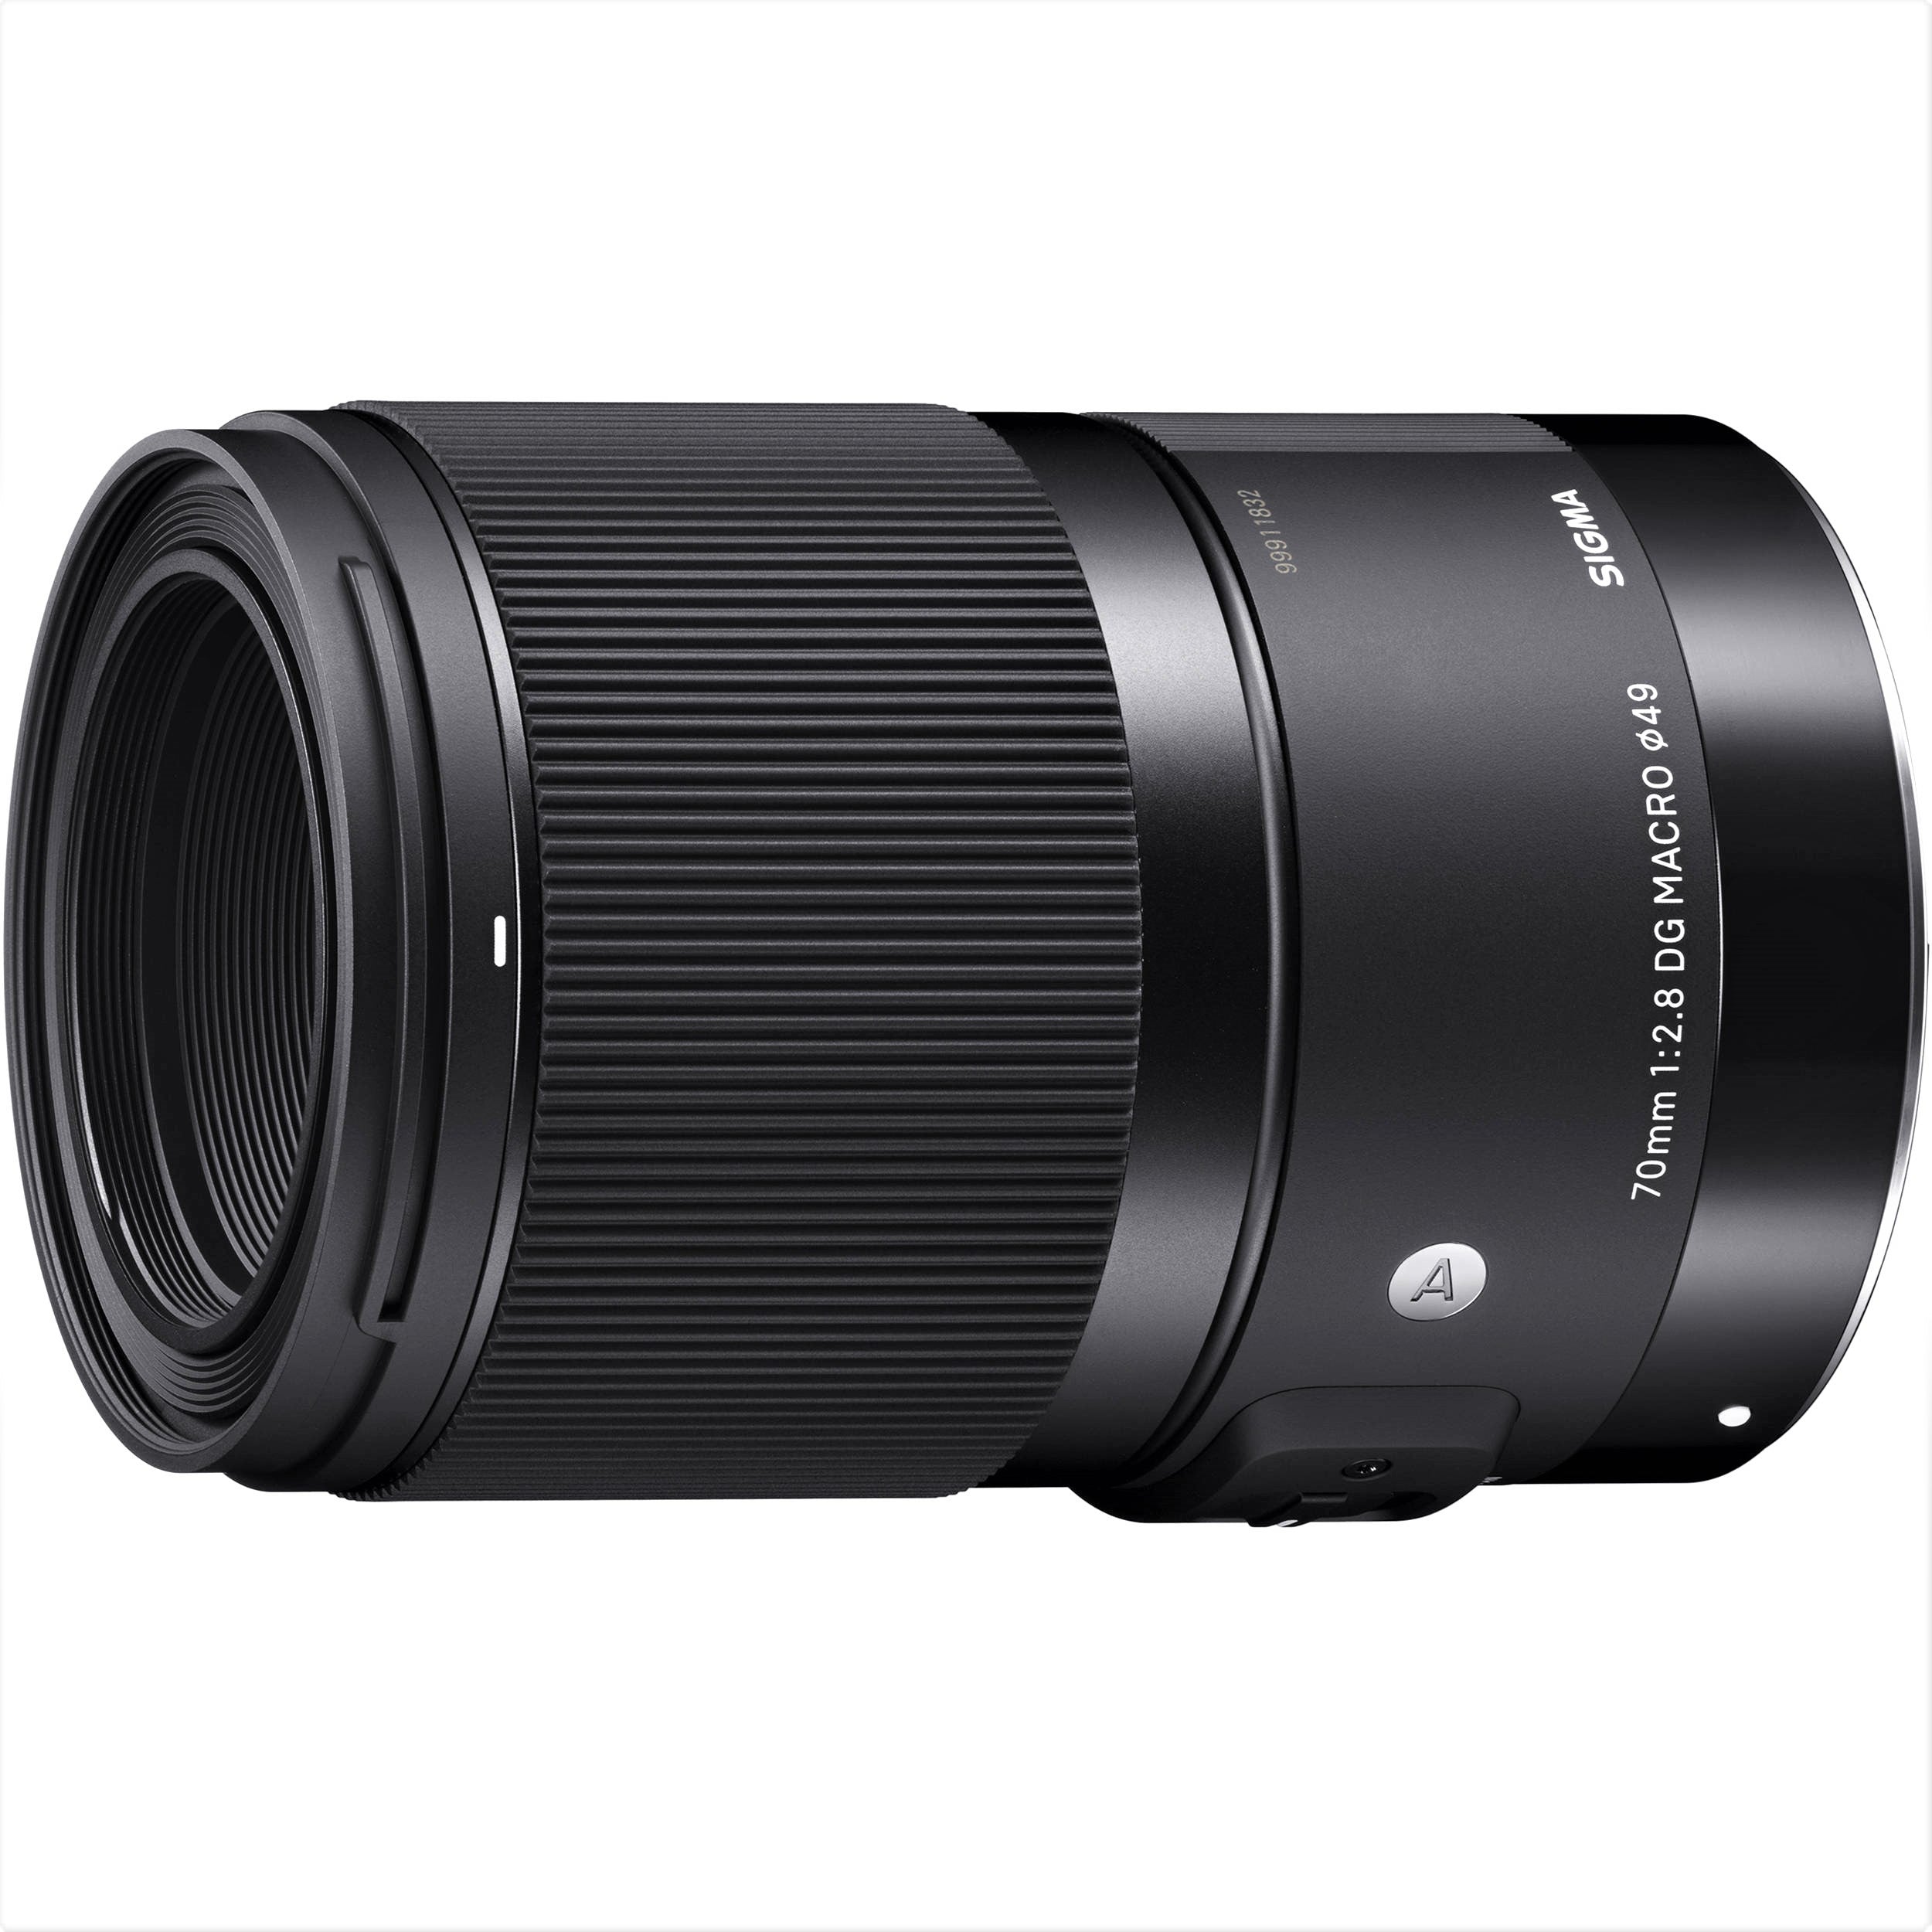 Sigma 70mm F2.8 DG Macro Art Lens for Canon EF in a Side View